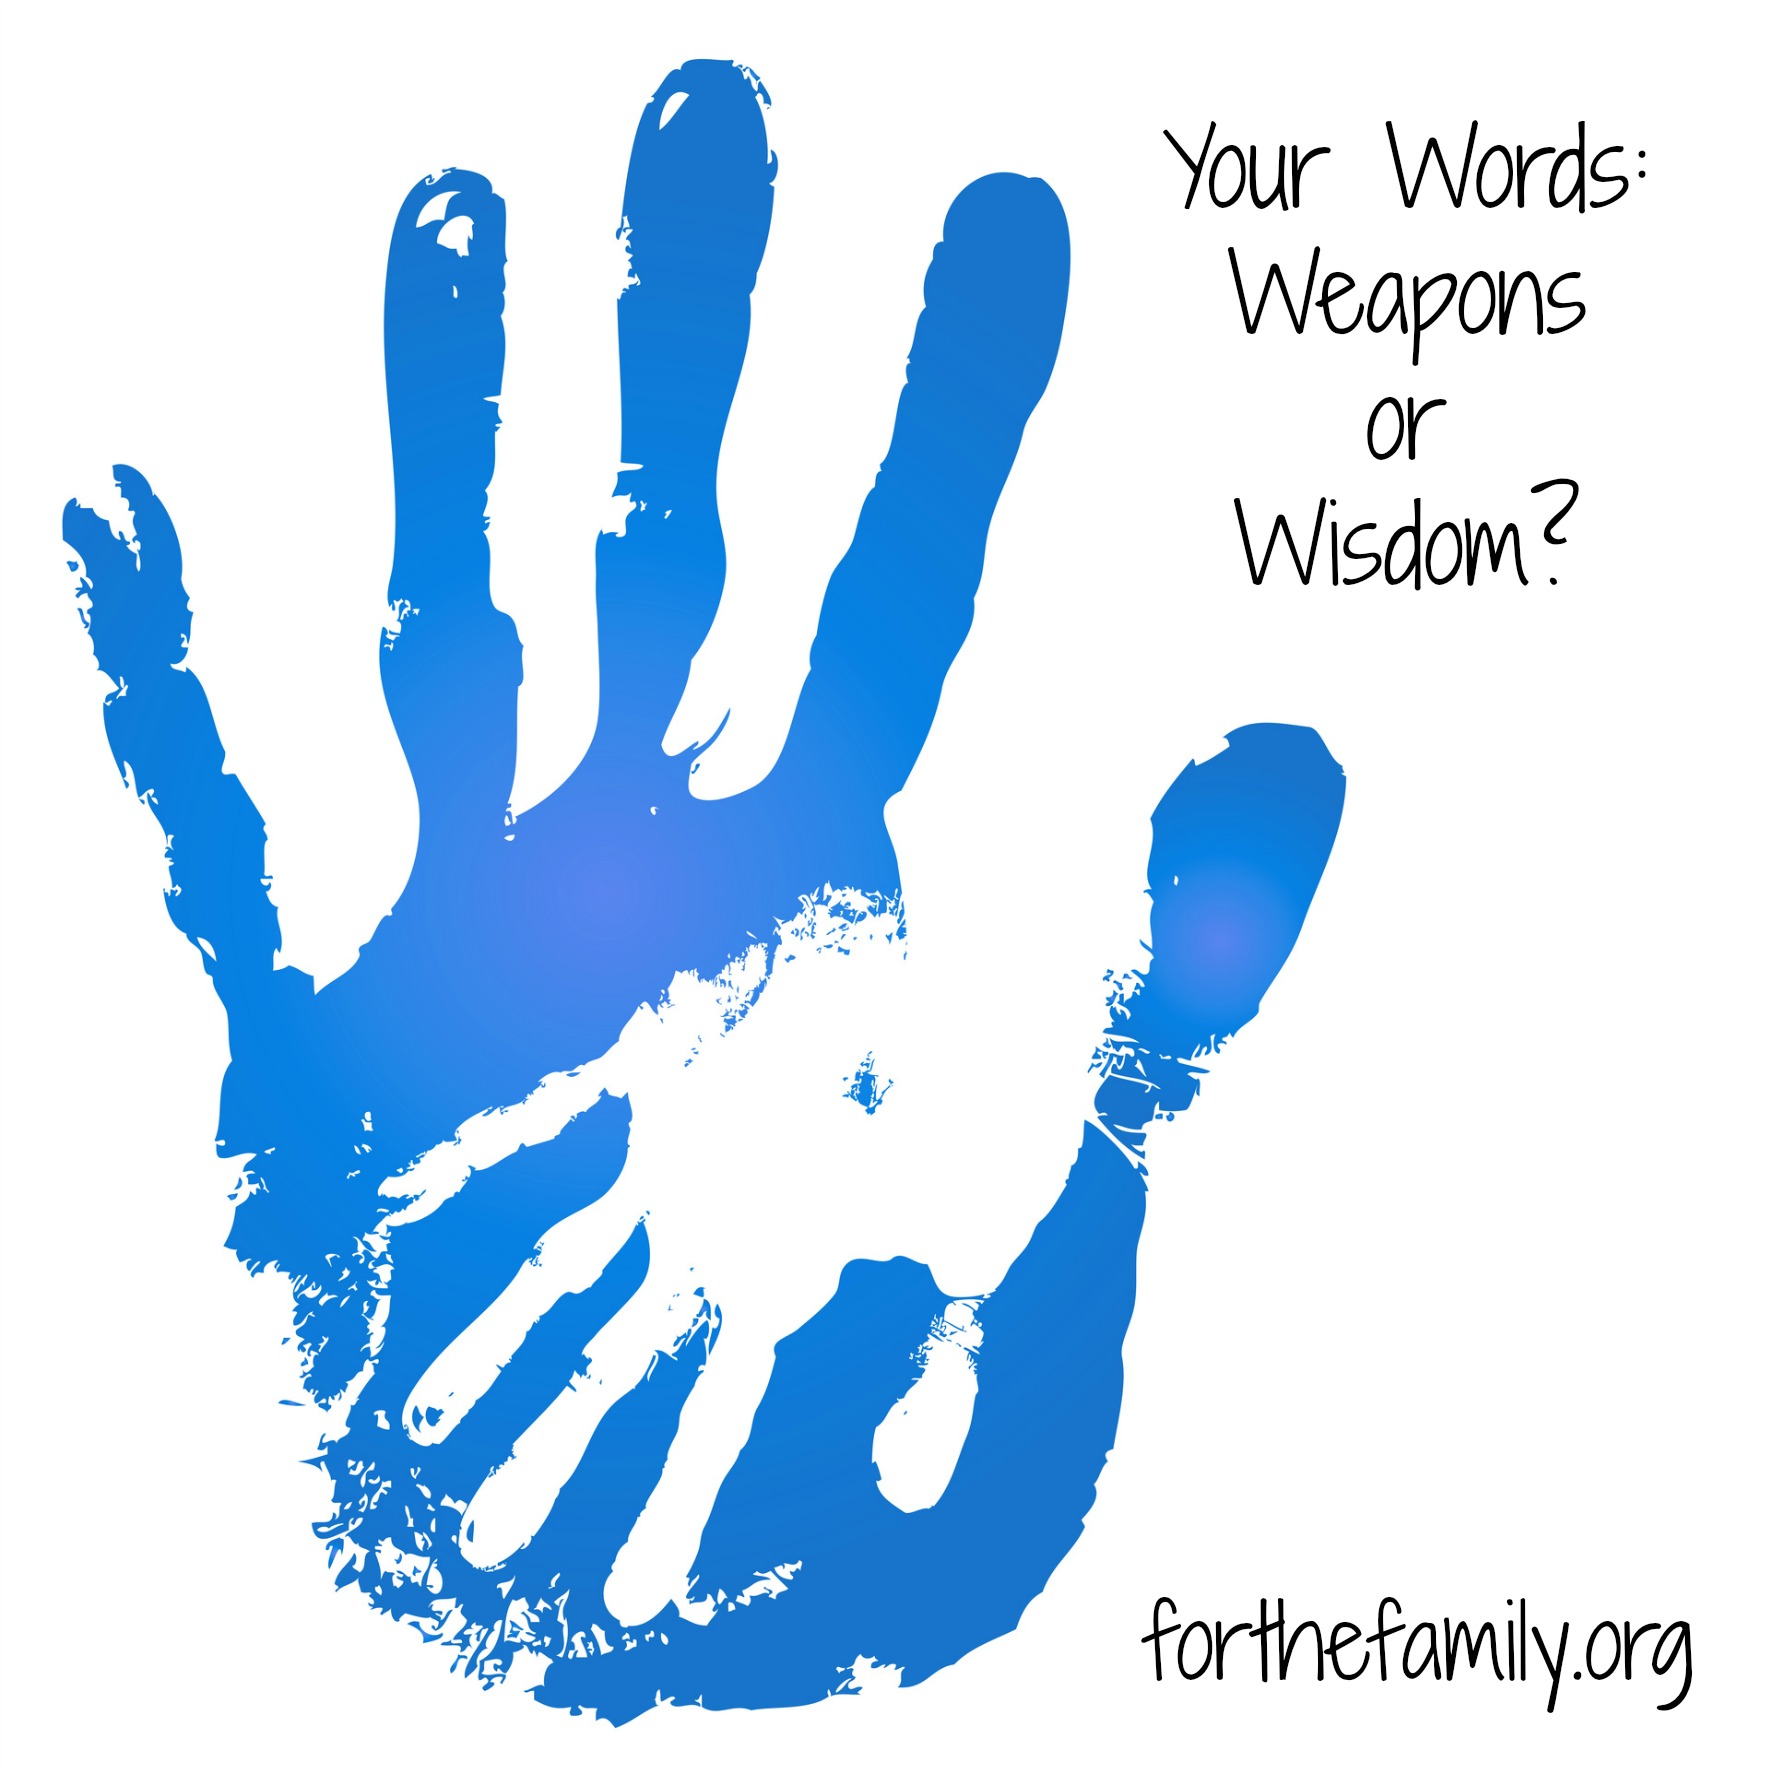 Your Words: Weapon or Wisdom?